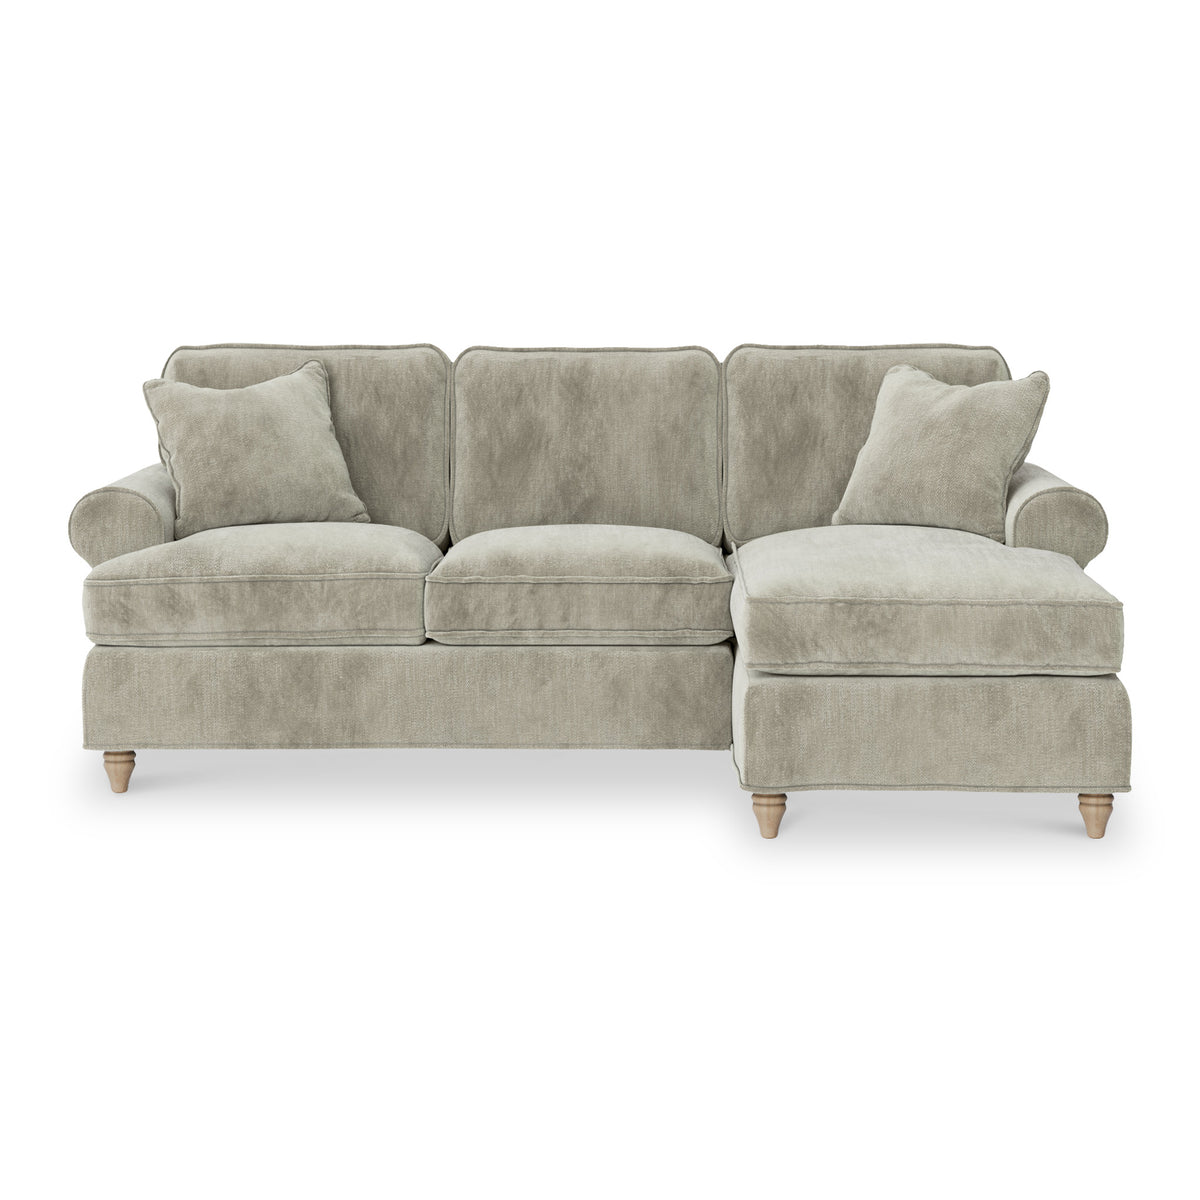 Alfie Chaise Sofa in Mink by Roseland Furniture